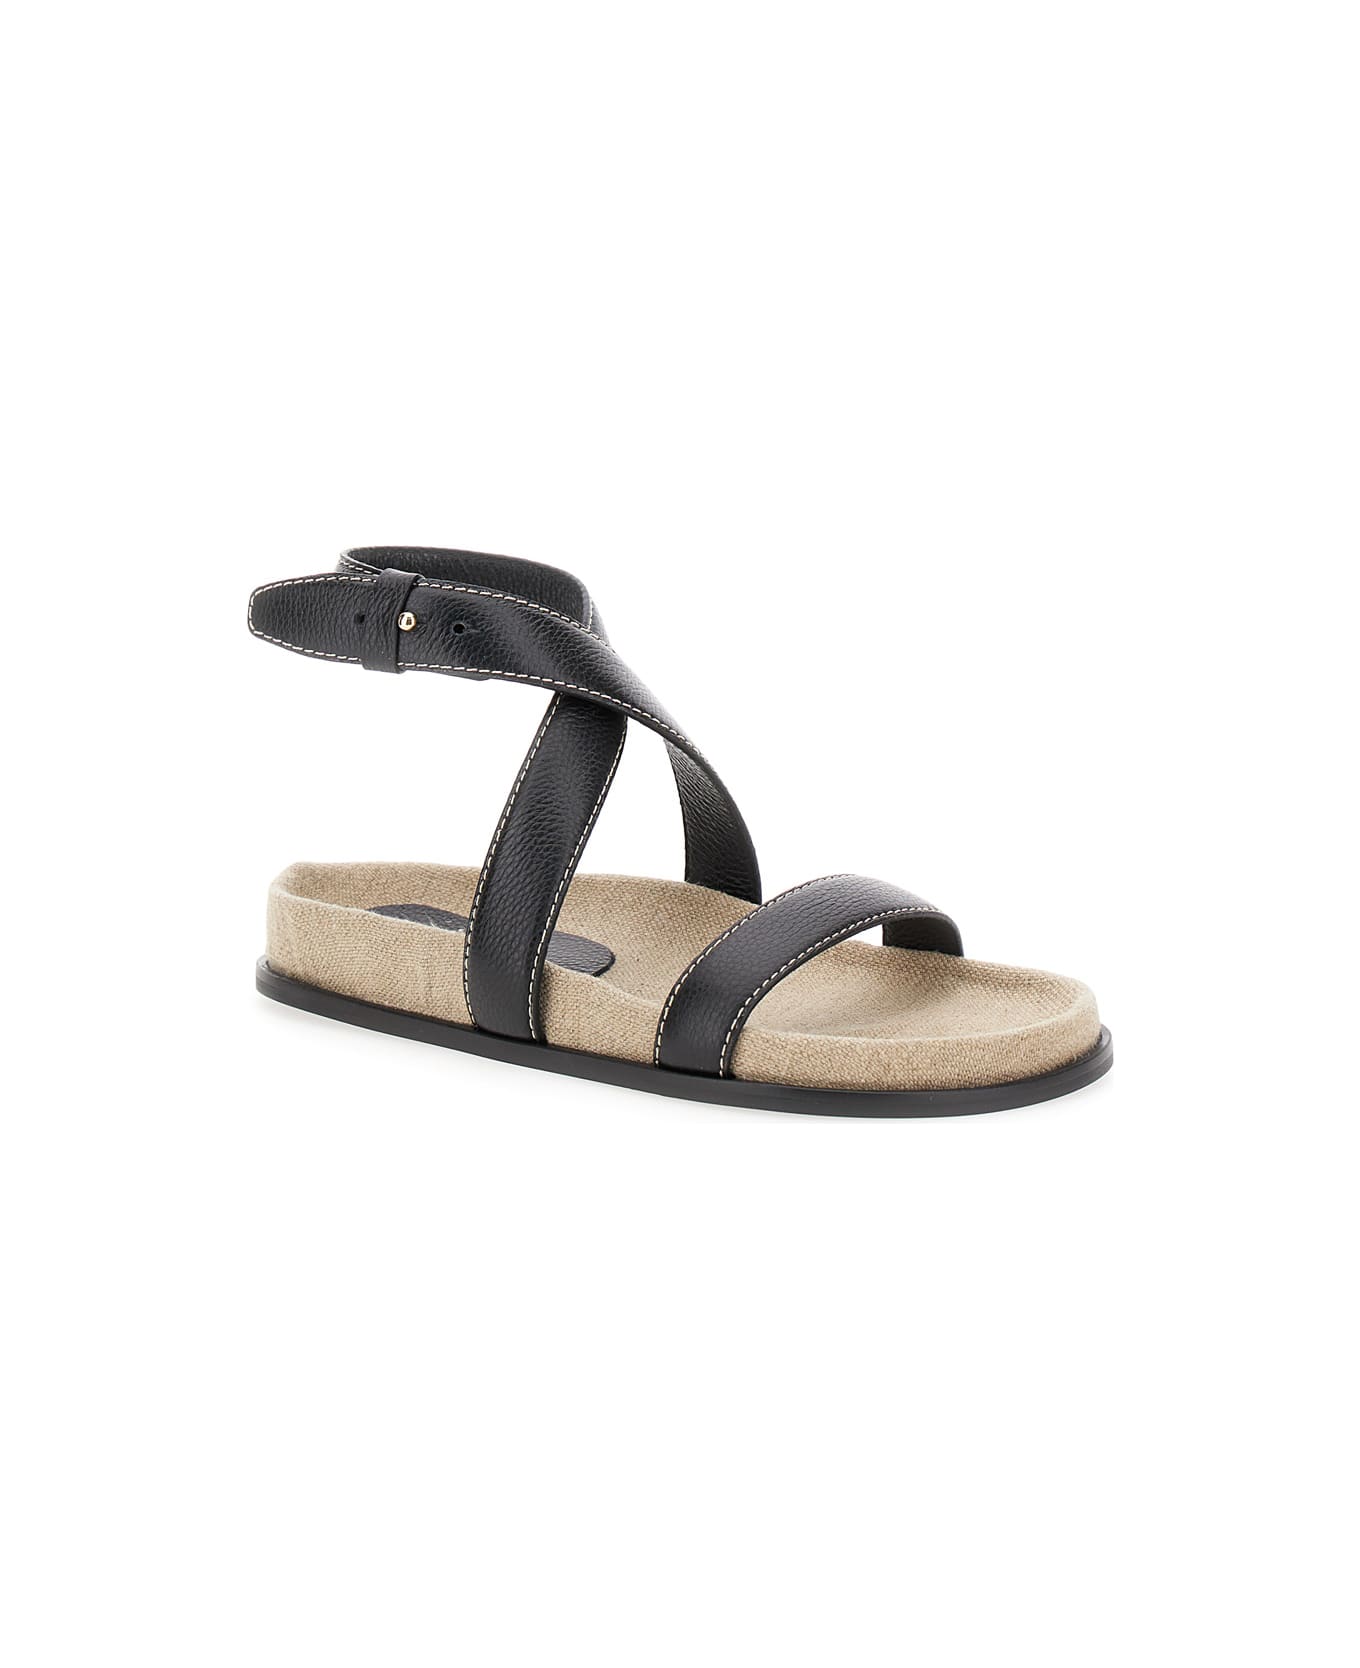 Totême 'the Chunky' Black Sandals With Straps In Leather Woman - Black